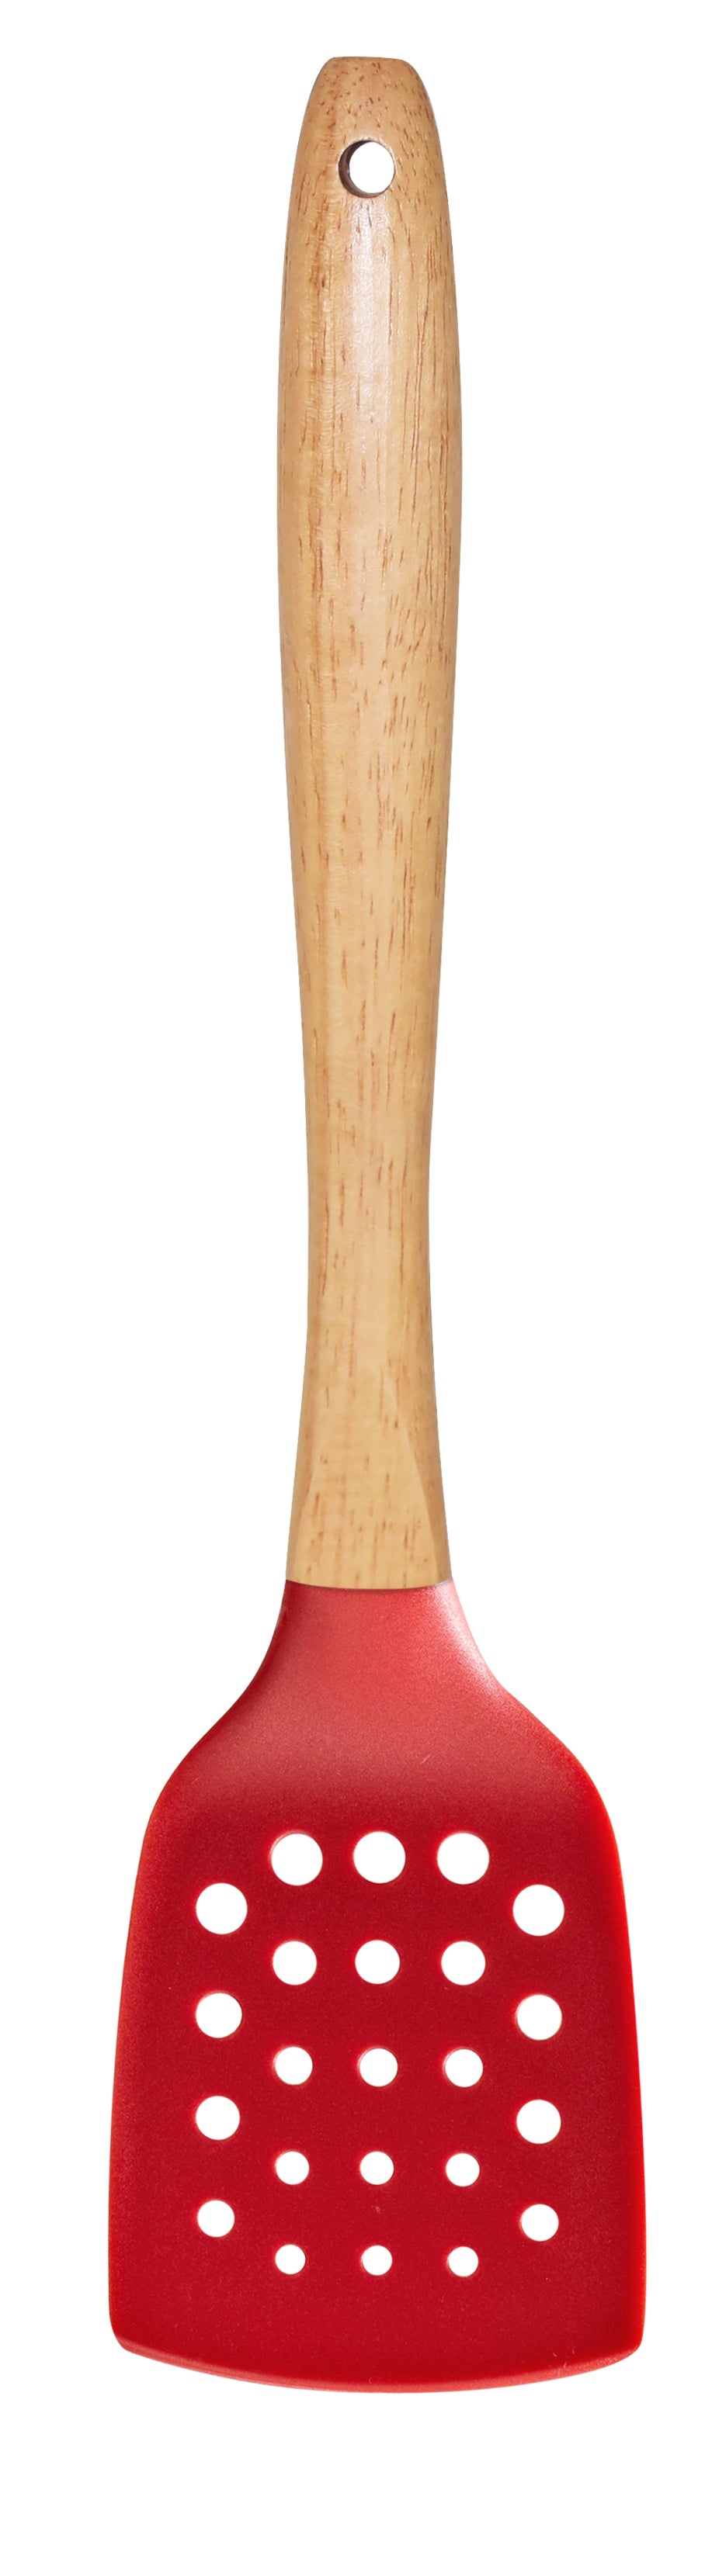 
                  
                    Bene Casa 14" Nylon Spatula with Wooden Handle, Red
                  
                